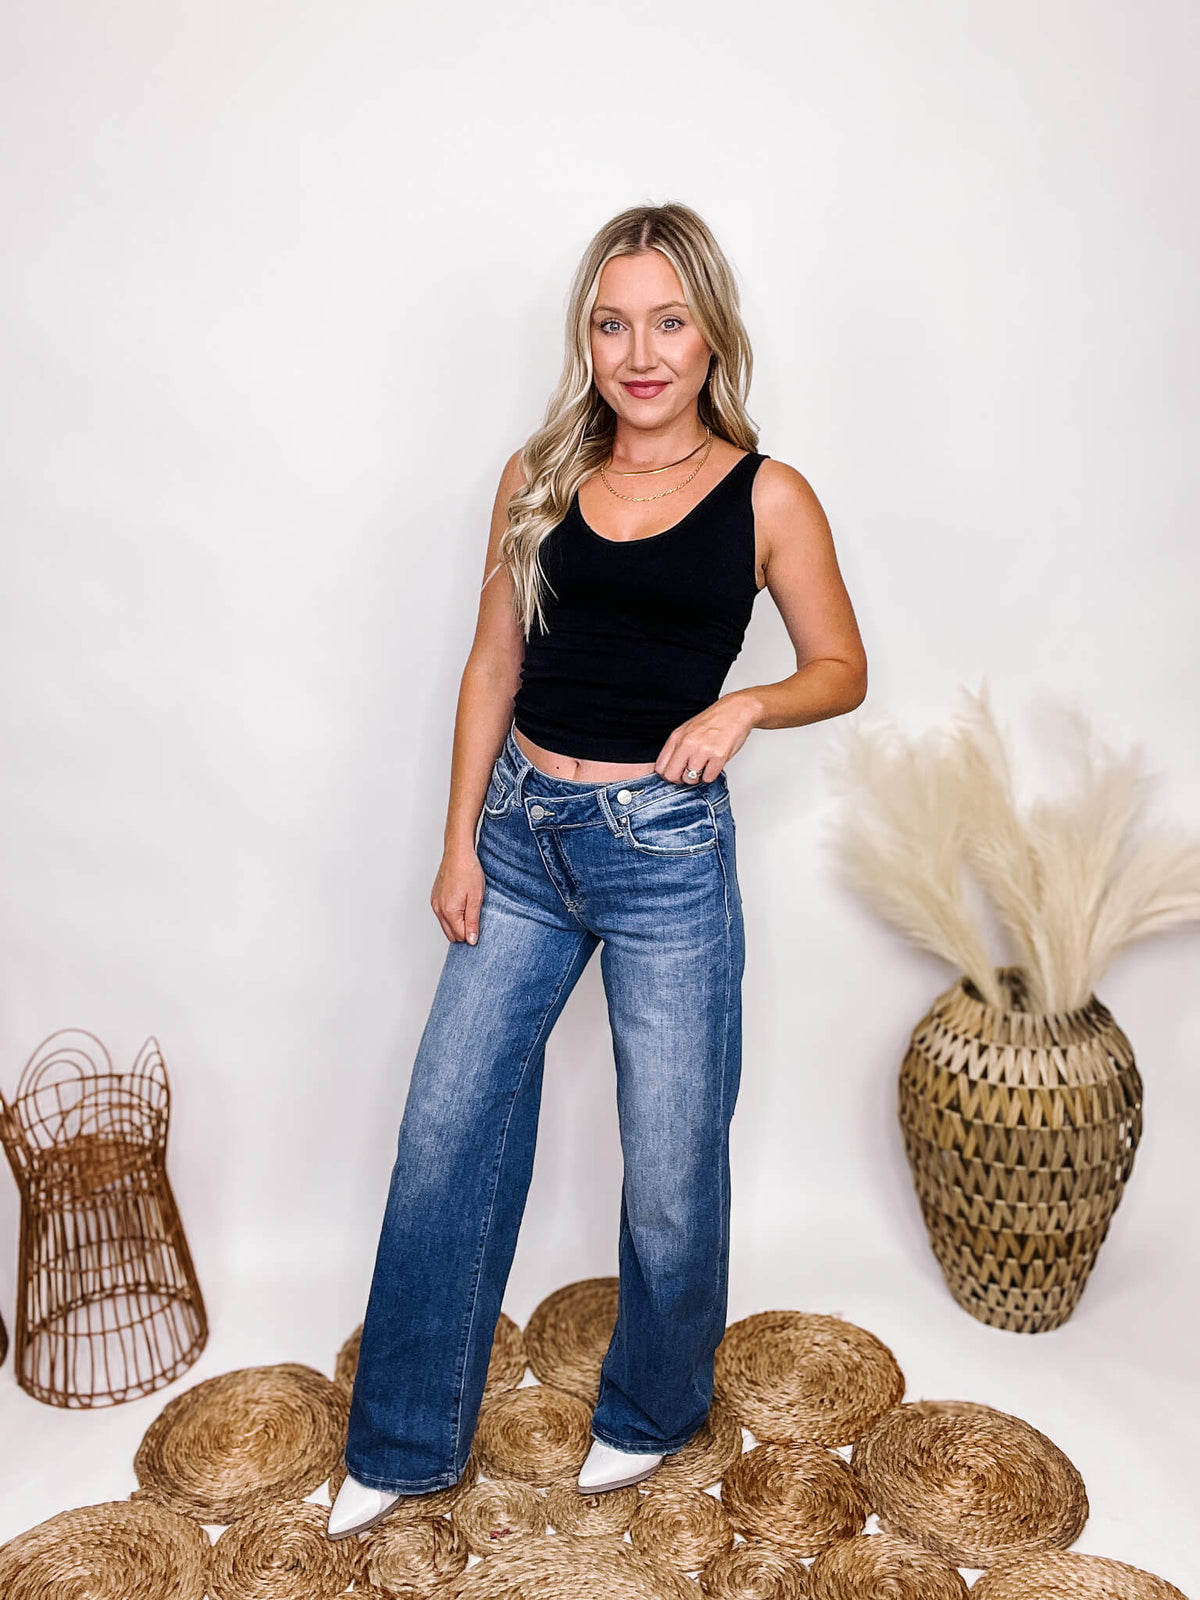 Midrise Crossover Waist Wide Leg Risen Jeans Stretchy Button and Zip Fly True to Size 9.5" Rise, Approximately 32.5" Inseam 95% Cotton, 3.5% Rayon, 1.5% Spandex